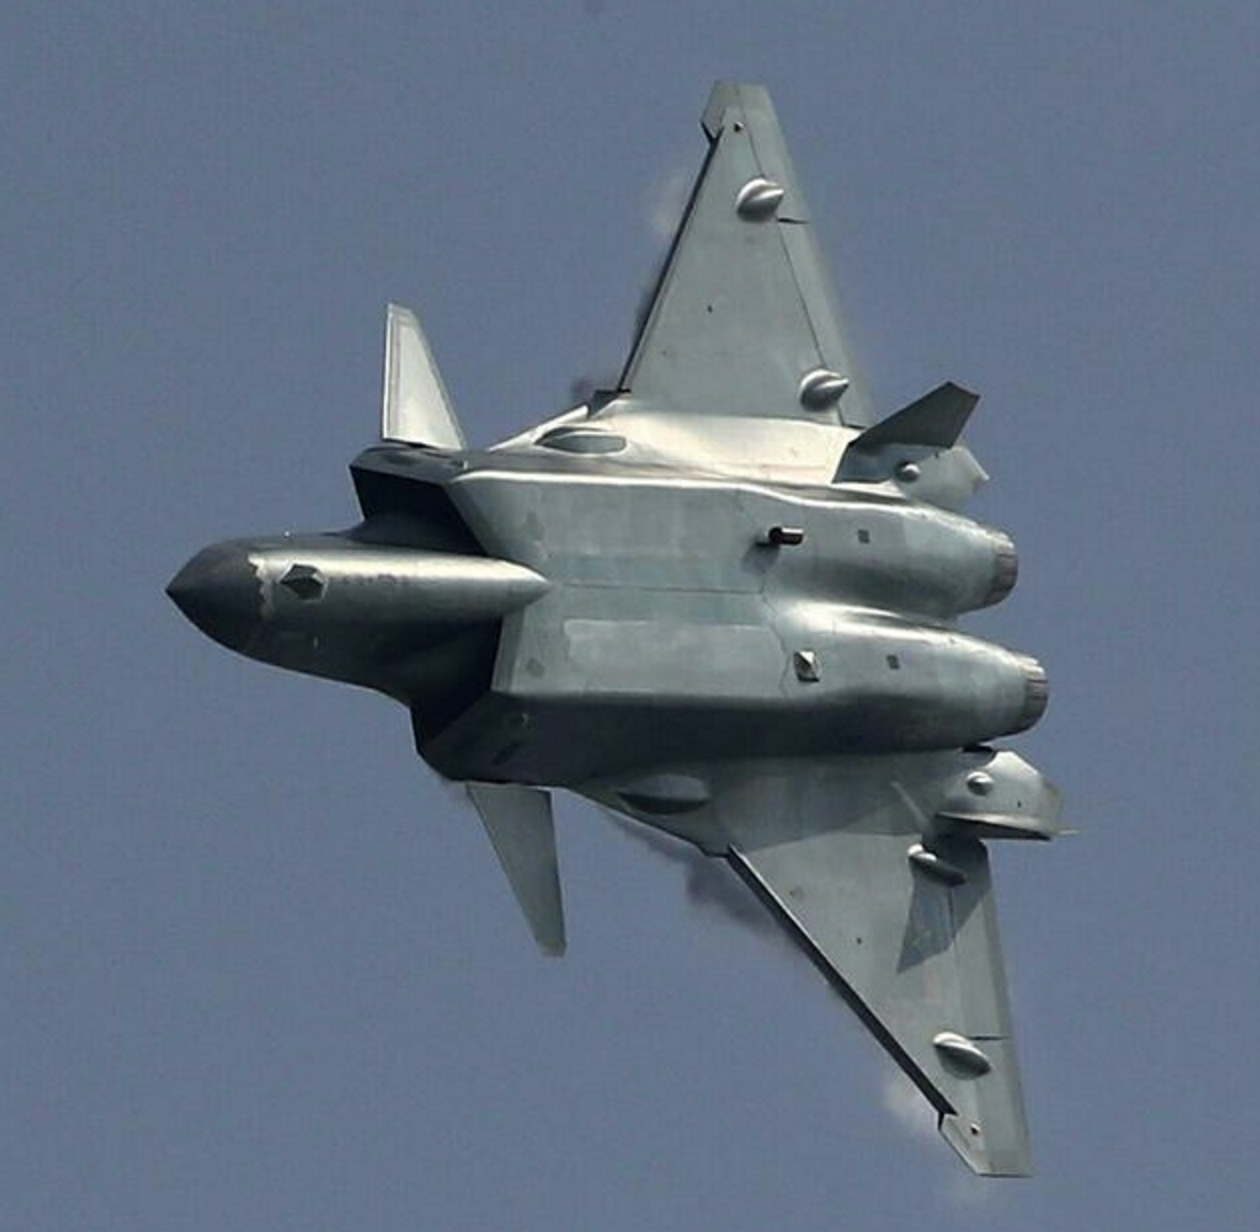 China’s New J-20 Stealth Fighter Makes Its Public Debut, But The US Isn’t Impressed